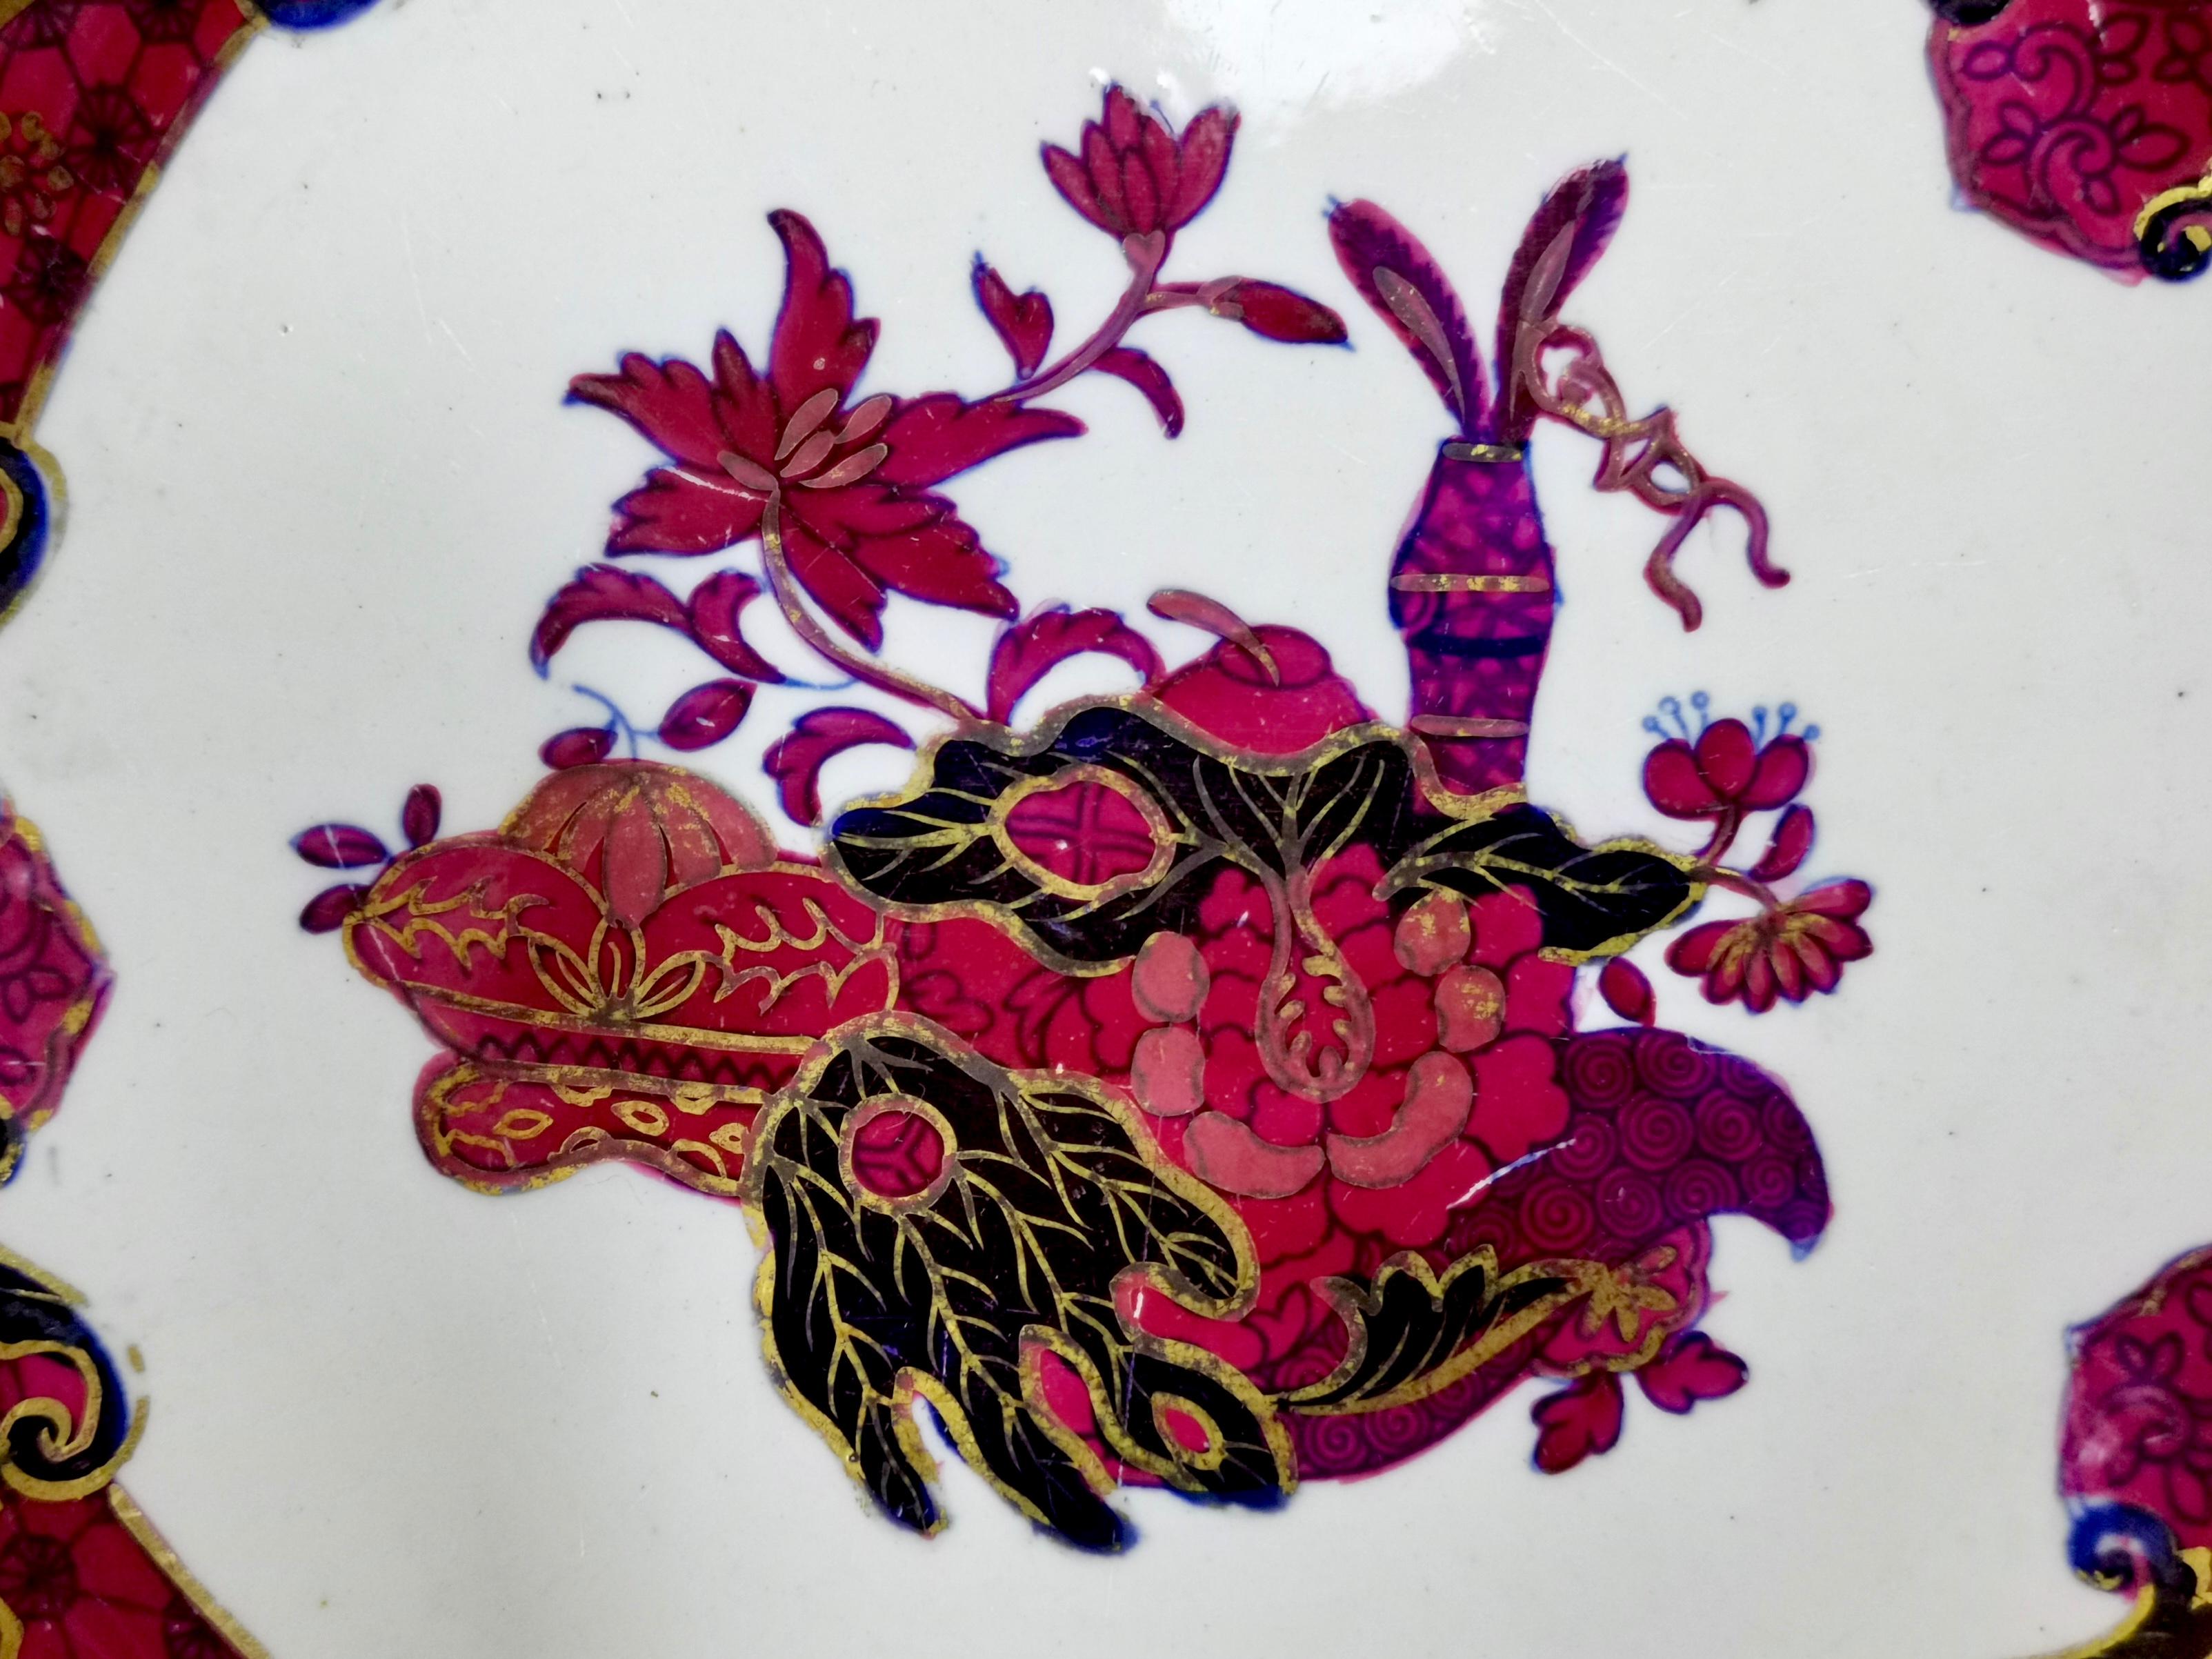 Spode Imperial China Dessert Service, Frog Pattern in Mauve, Regency circa 1828 For Sale 5